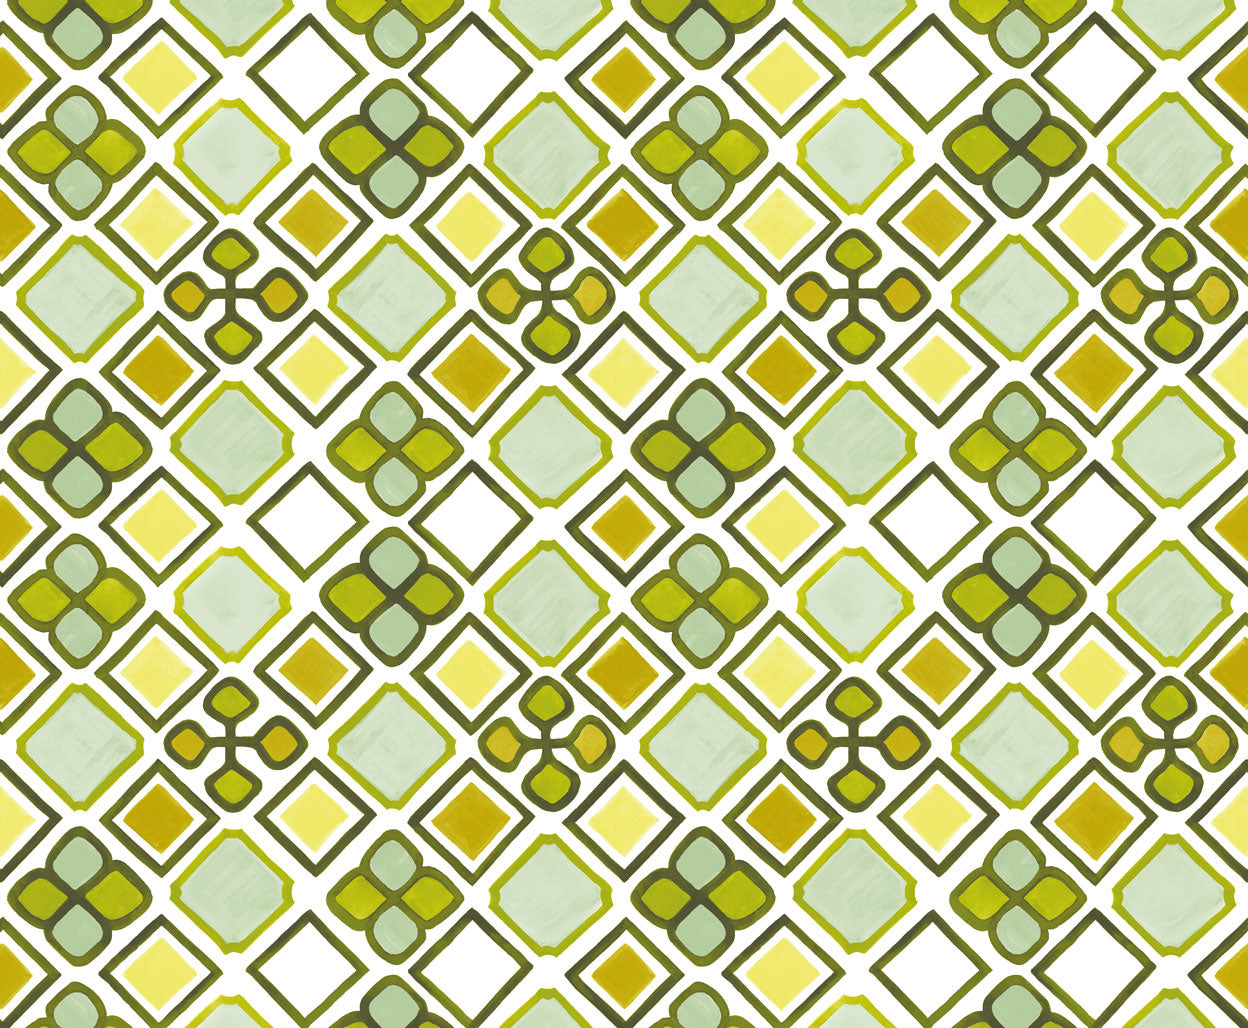 Detail of fabric in a geometric diamond and floral print in shades of green, yellow and white.